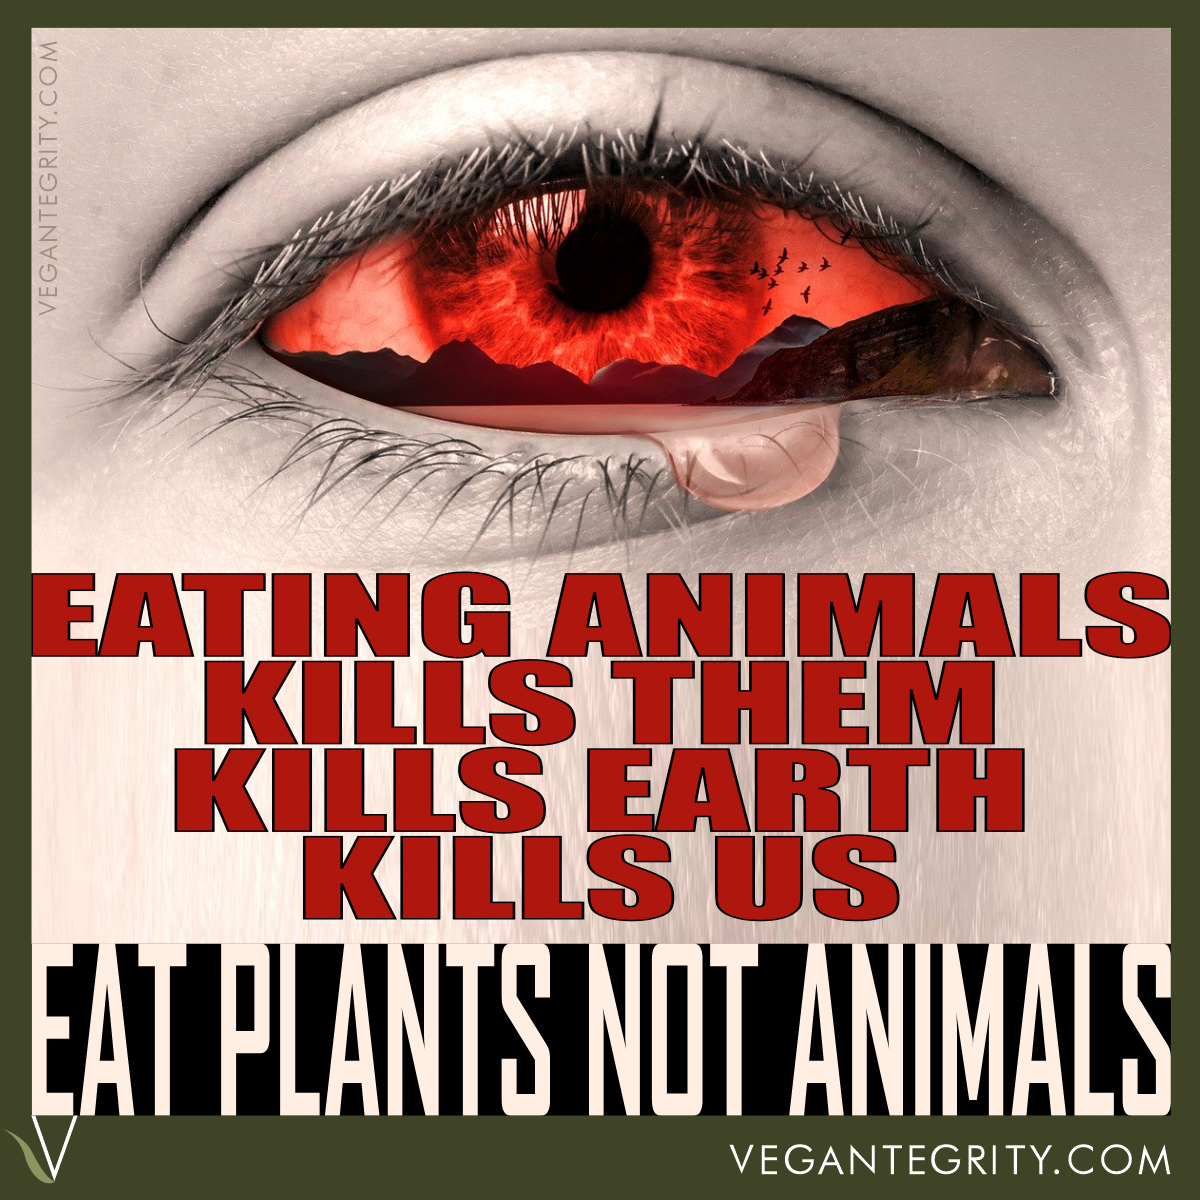 Eating animals kills them, kills Earth, kills us. Eat plants not animals. Black and white image of human eye with superimposed red tinted image of mountains and flock of birds flying inside eyeball area and a pink tear starting to fall from the eye, red text